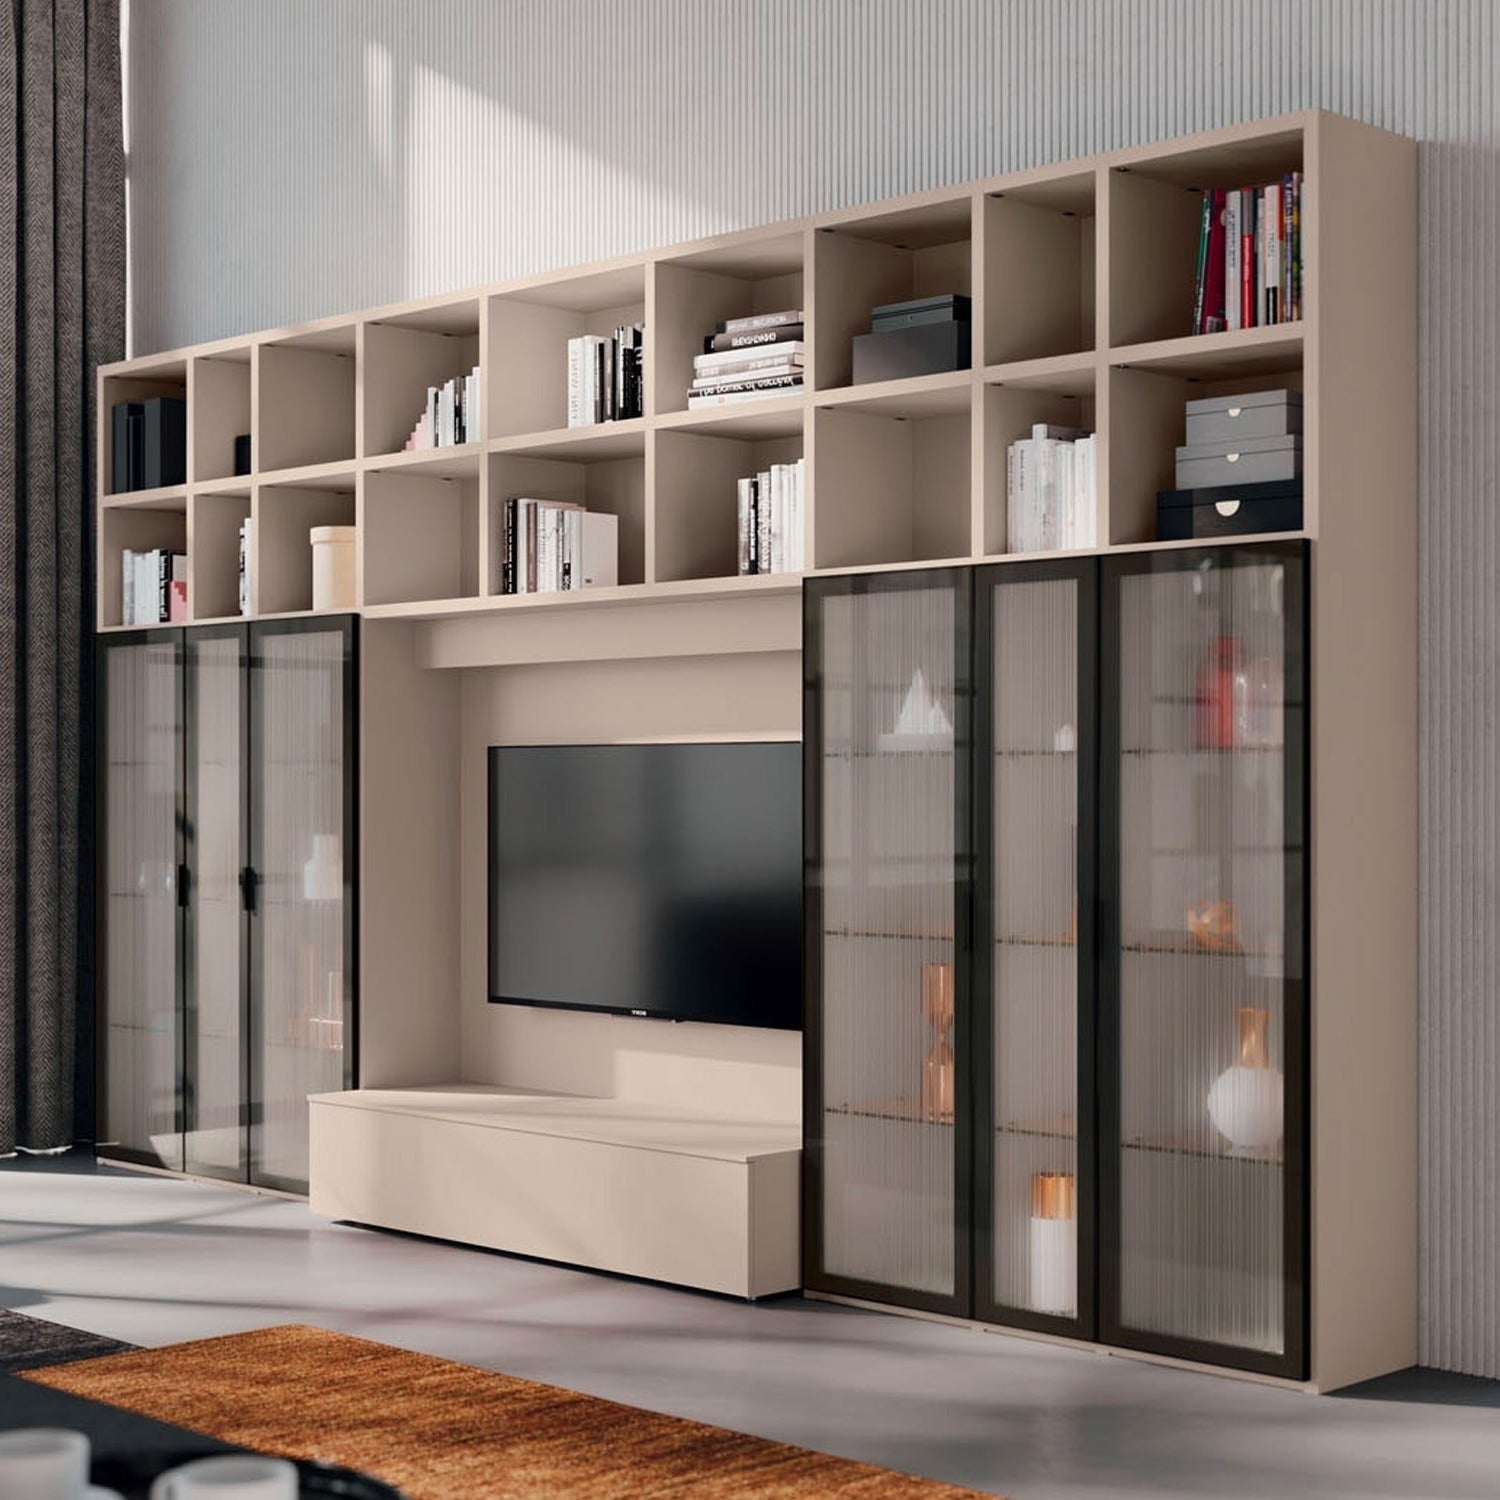 Light Day 24 Bookcase with glass doors and media unit by Orme Design